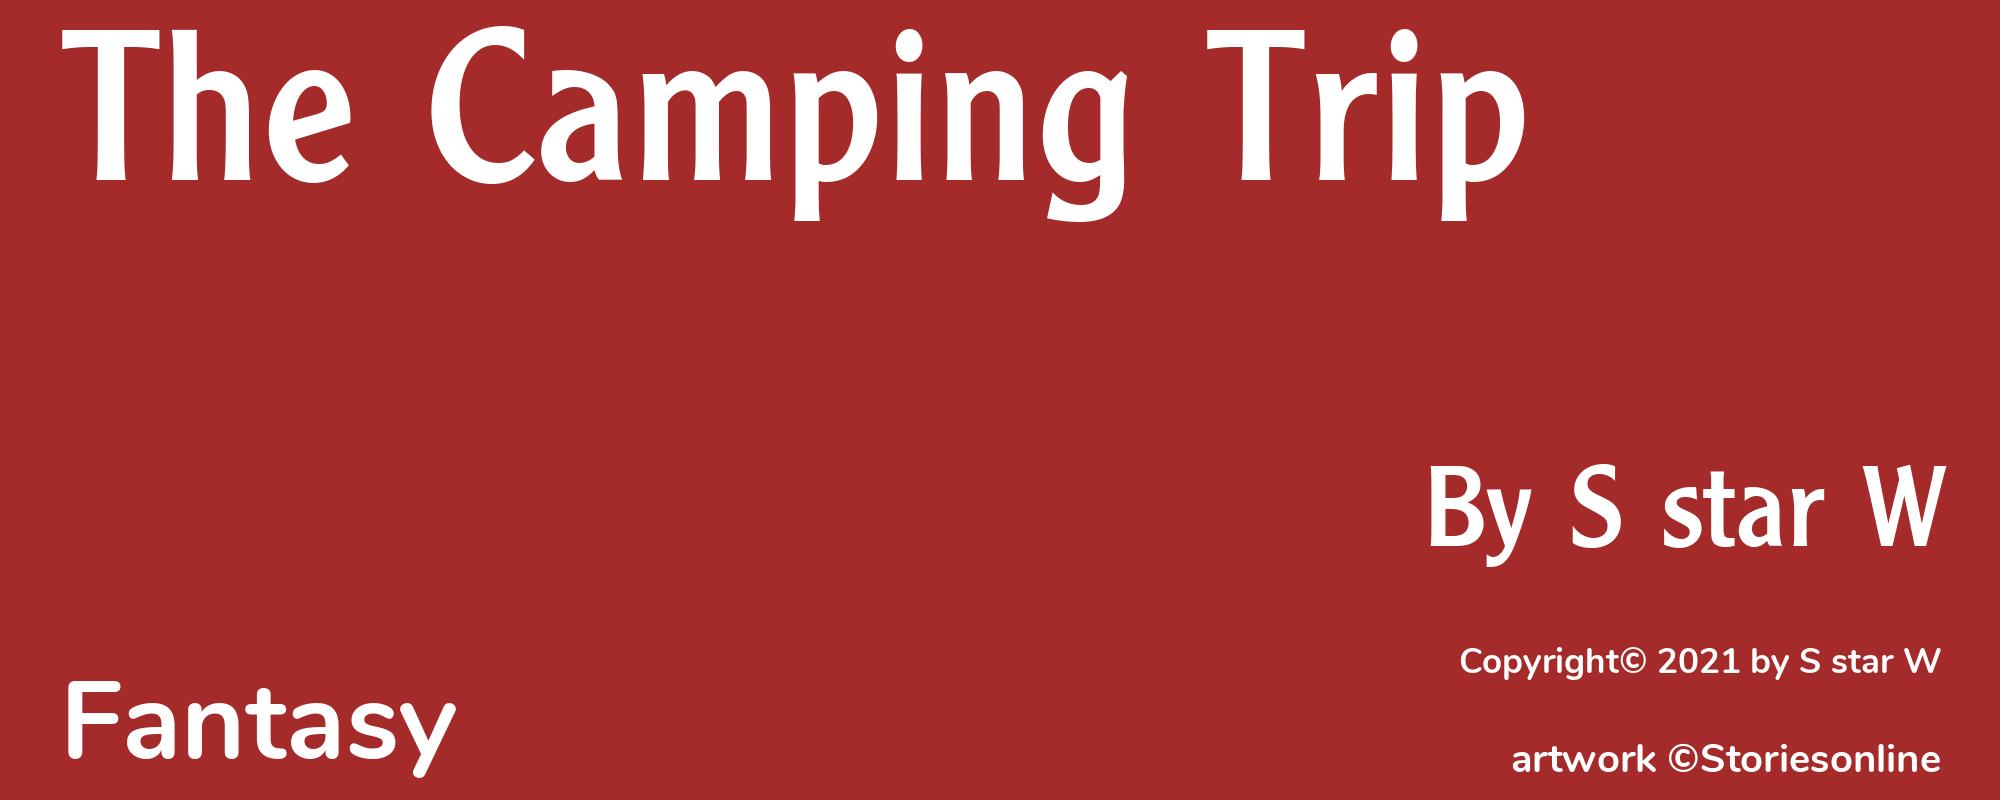 The Camping Trip - Cover